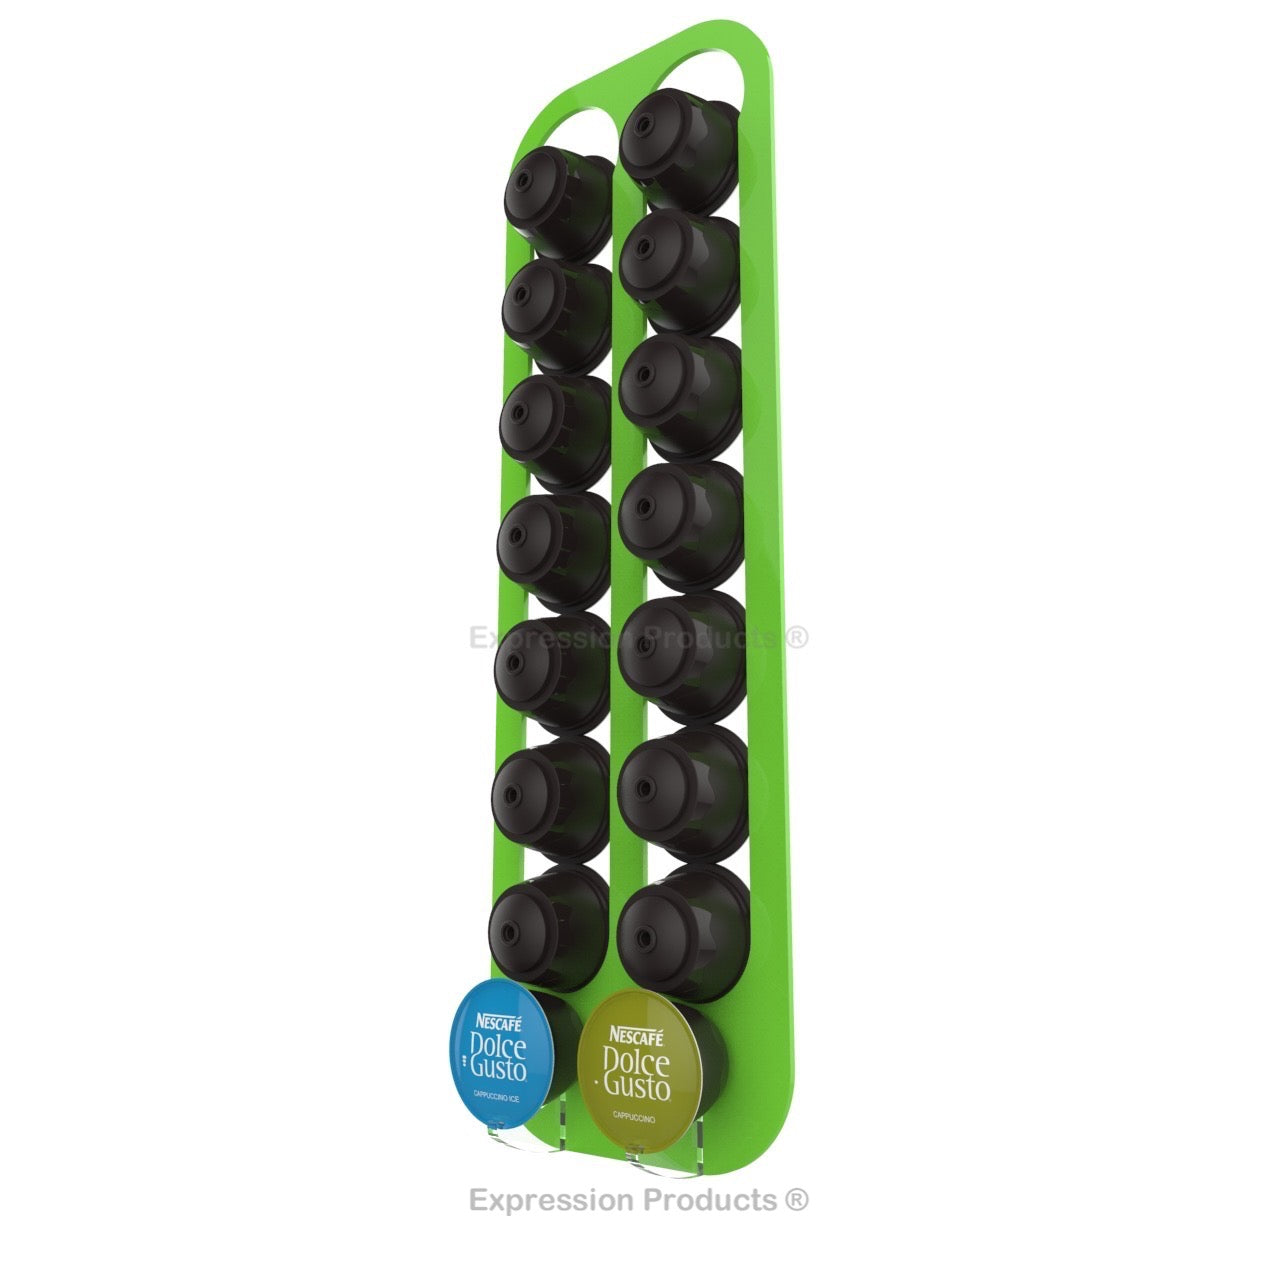 Dolce Gusto Coffee Pod Holder, Wall Mounted.  Shown in Lime Holding 16 Pods